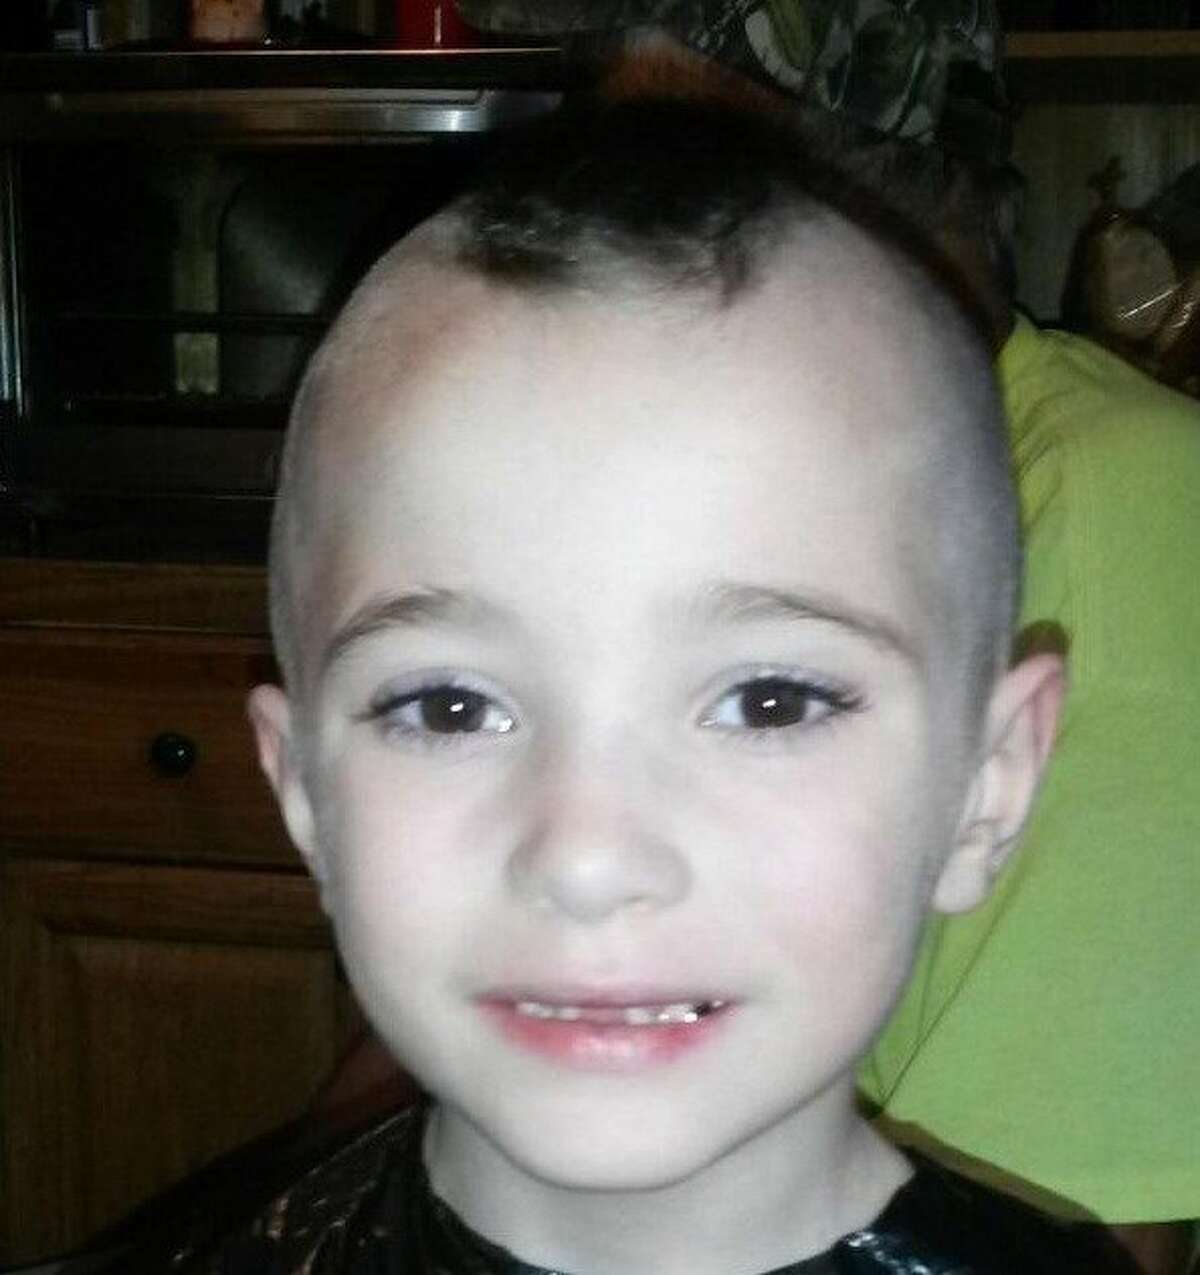 An Amber Alert was issued for Kenneth White, 5, of Berne on Dec. 18, 2014. (State Police) ORG XMIT: MER2014121815164143